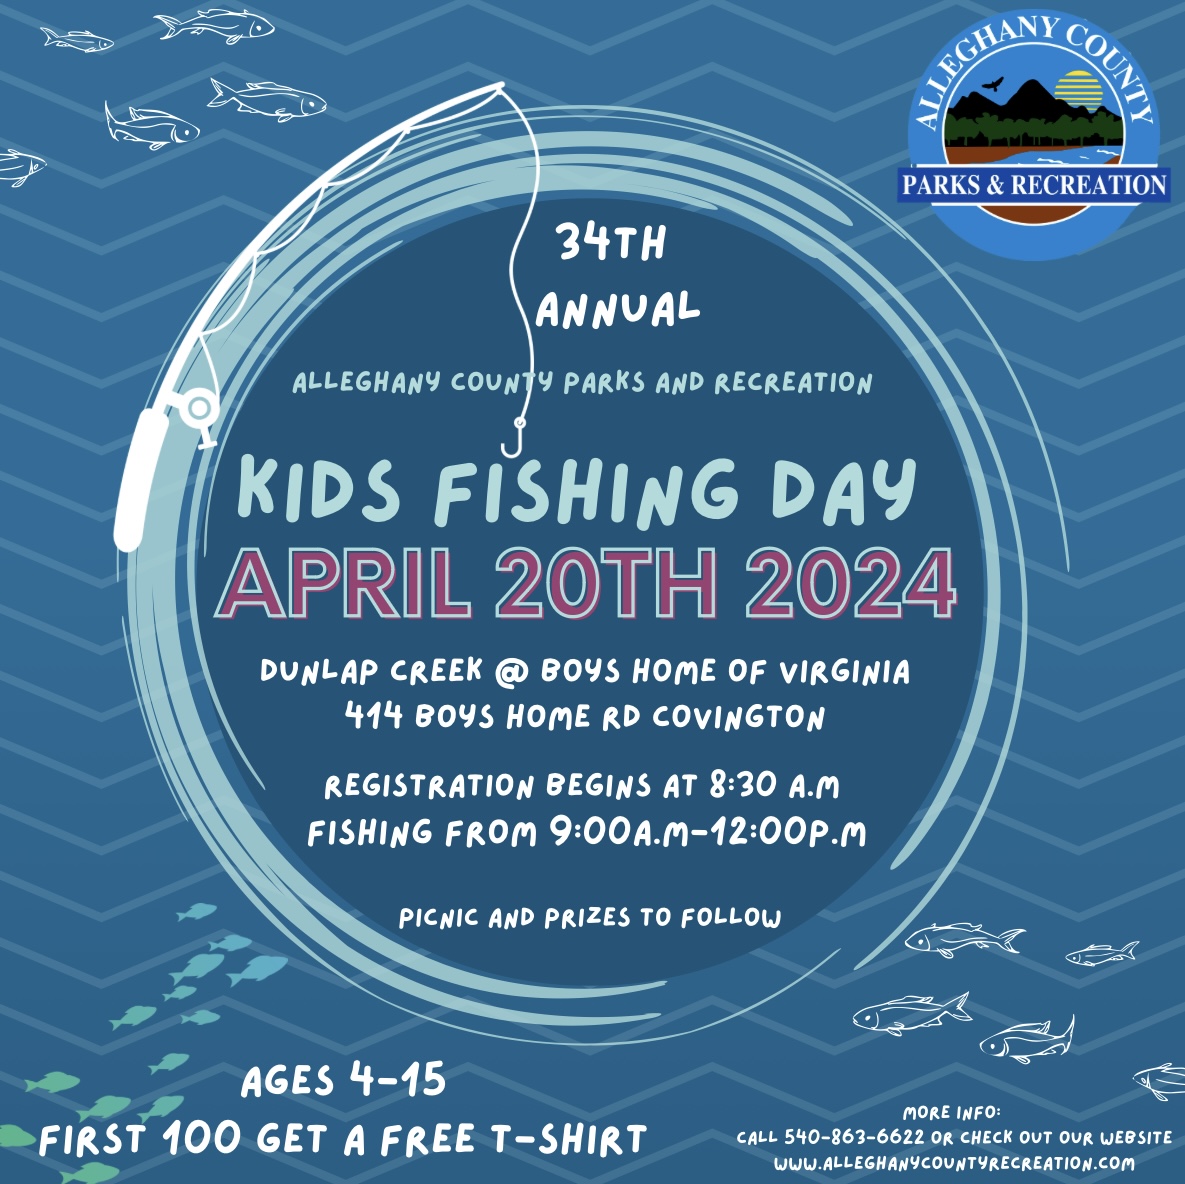 34th Annual Kids Fishing Day - Alleghany Highlands Chamber of